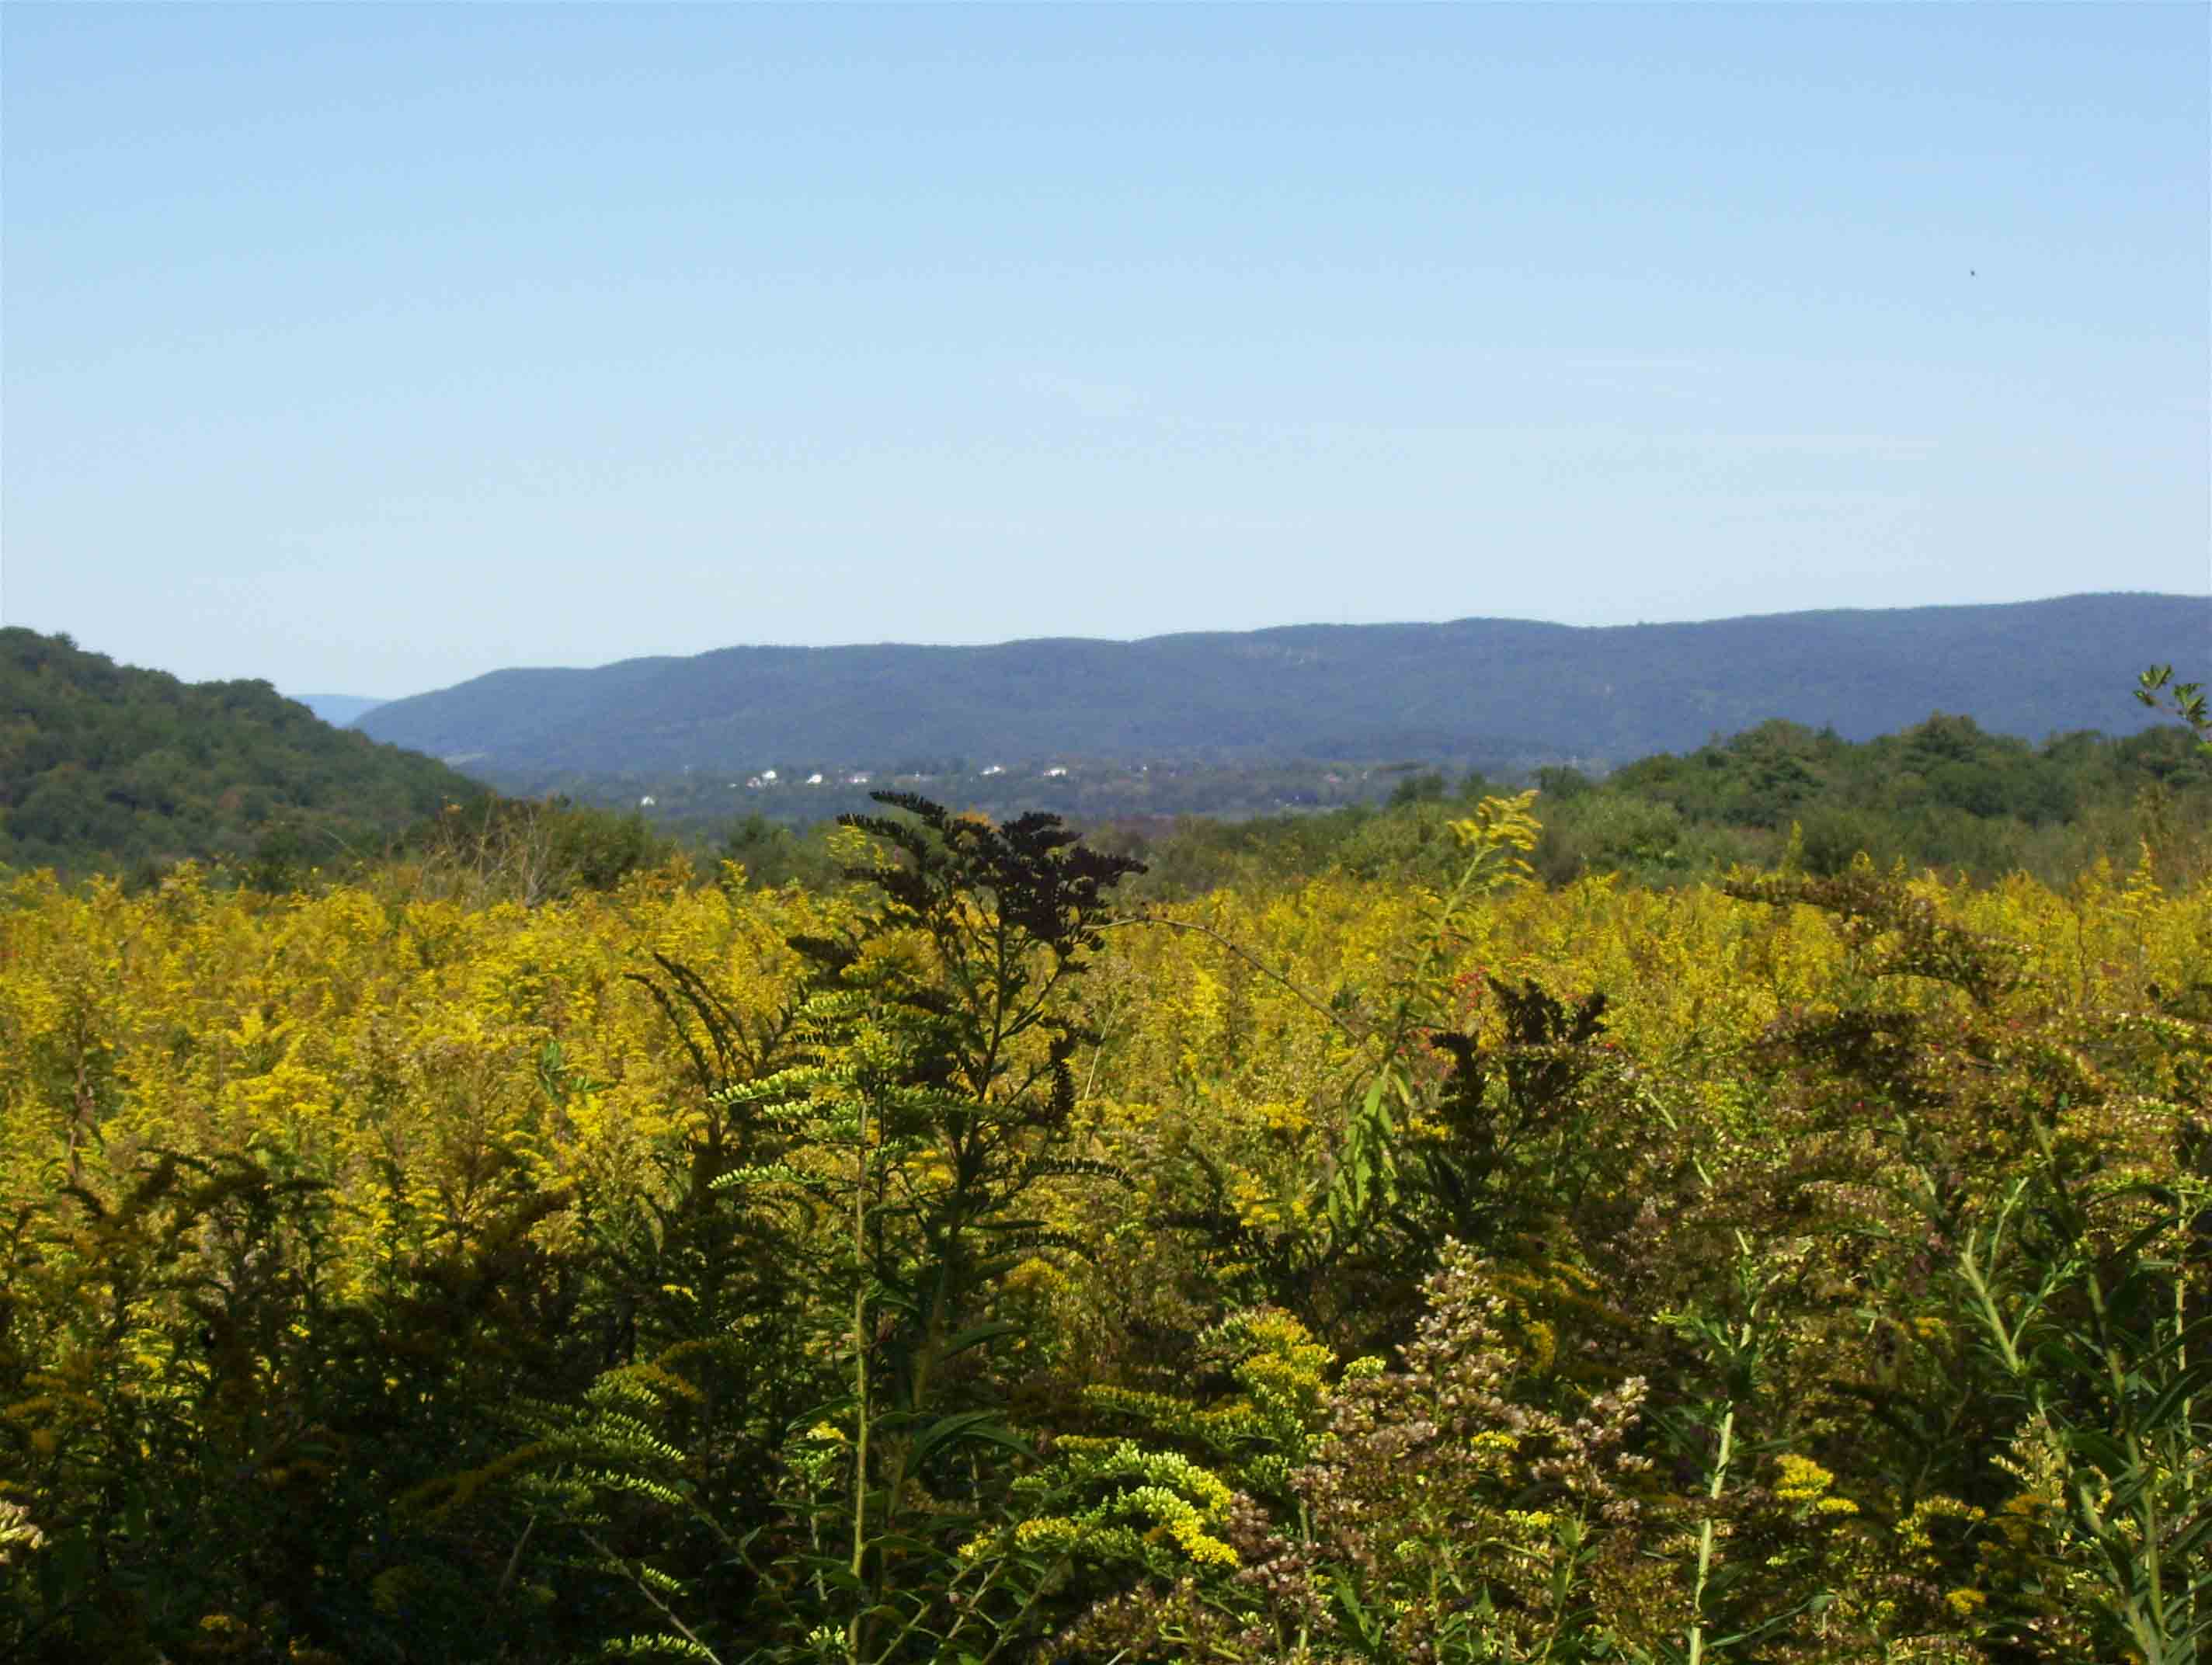 View to the north across a field of goldenrod. Taken at approx. mm 1.6.  Courtesy dlcul@conncoll.edu